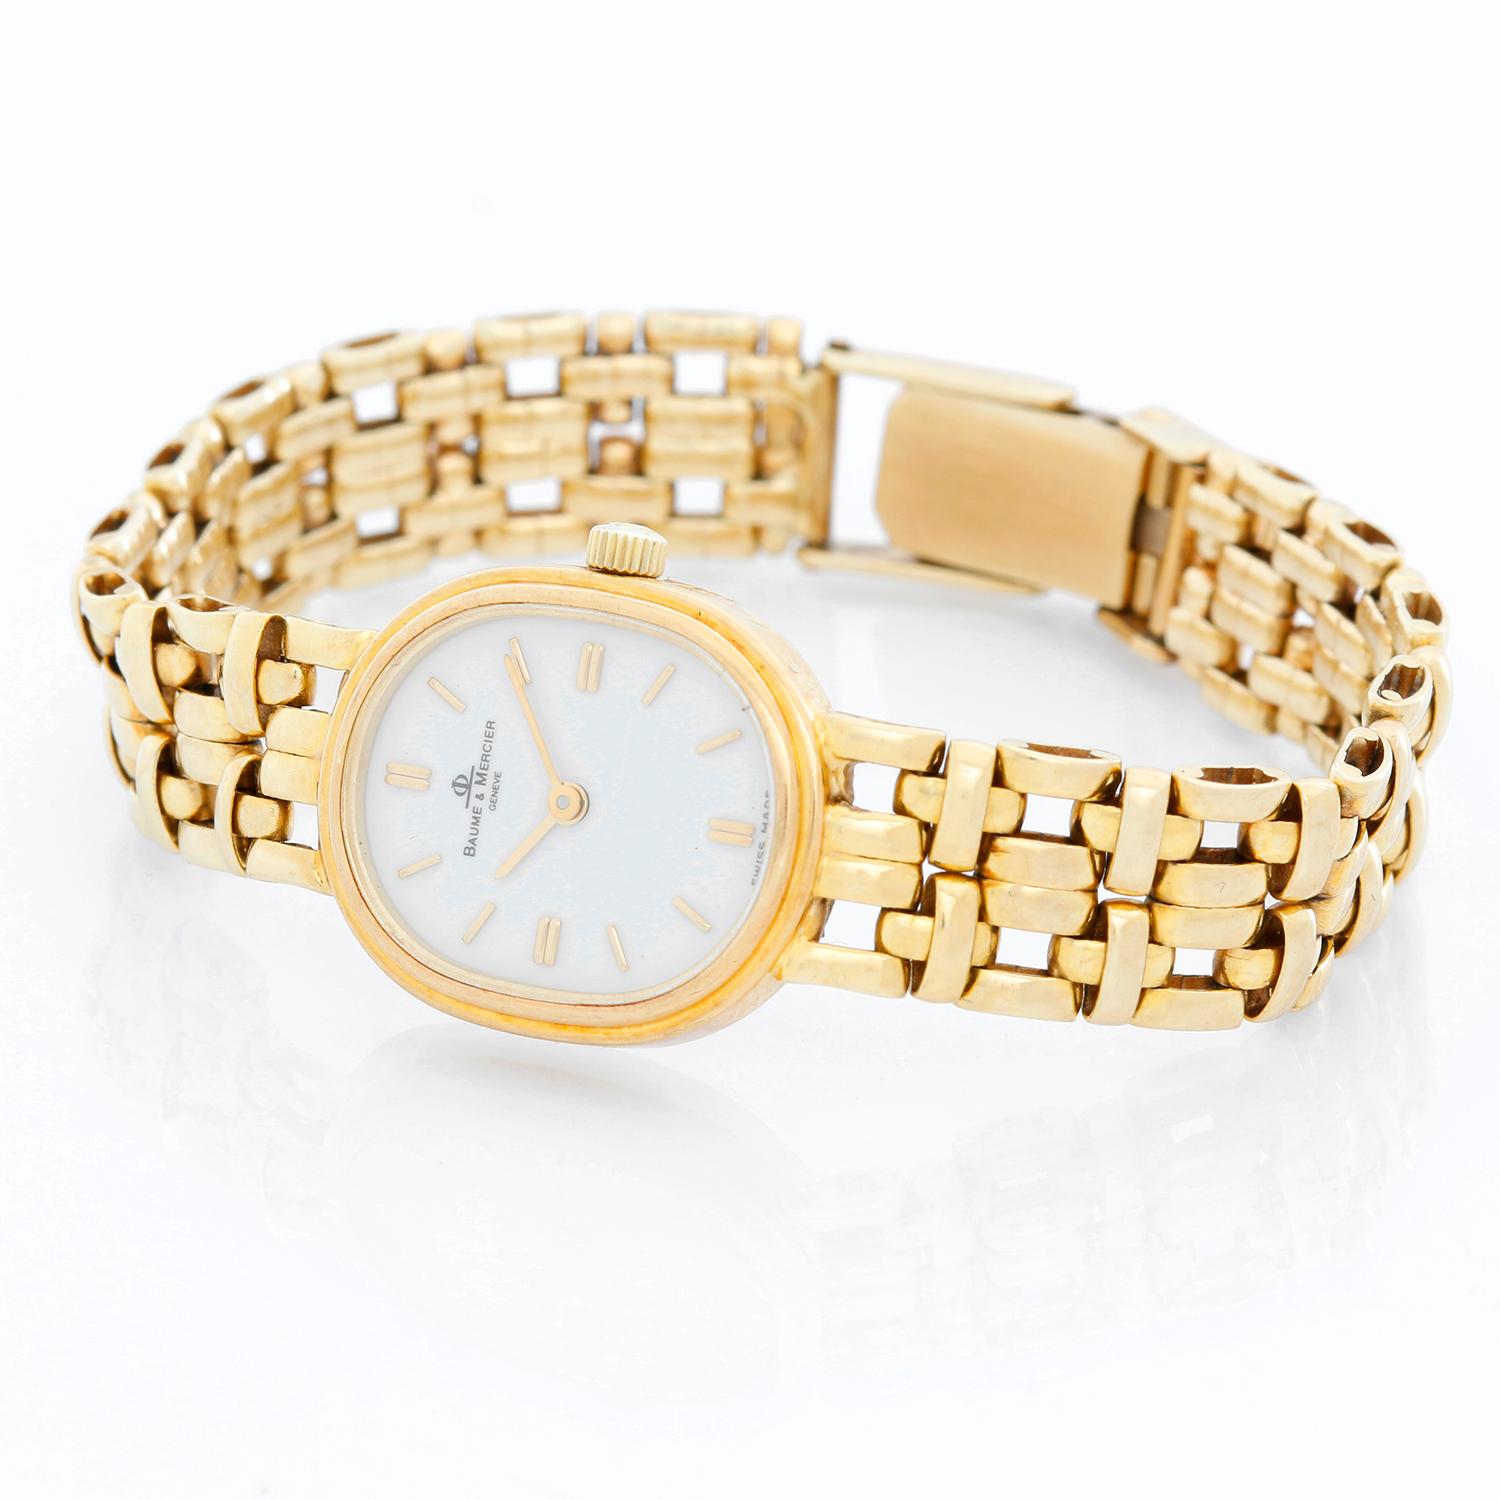 Baume & Mercier Ladies Classic Watch  - Quartz . 18K  Yellow gold ( 17 mm ) . Matte white dial with stick hour markers . 14K Yellow gold bracelet. Will fit up to a 6 inch wrist . Pre-owned with custom box .